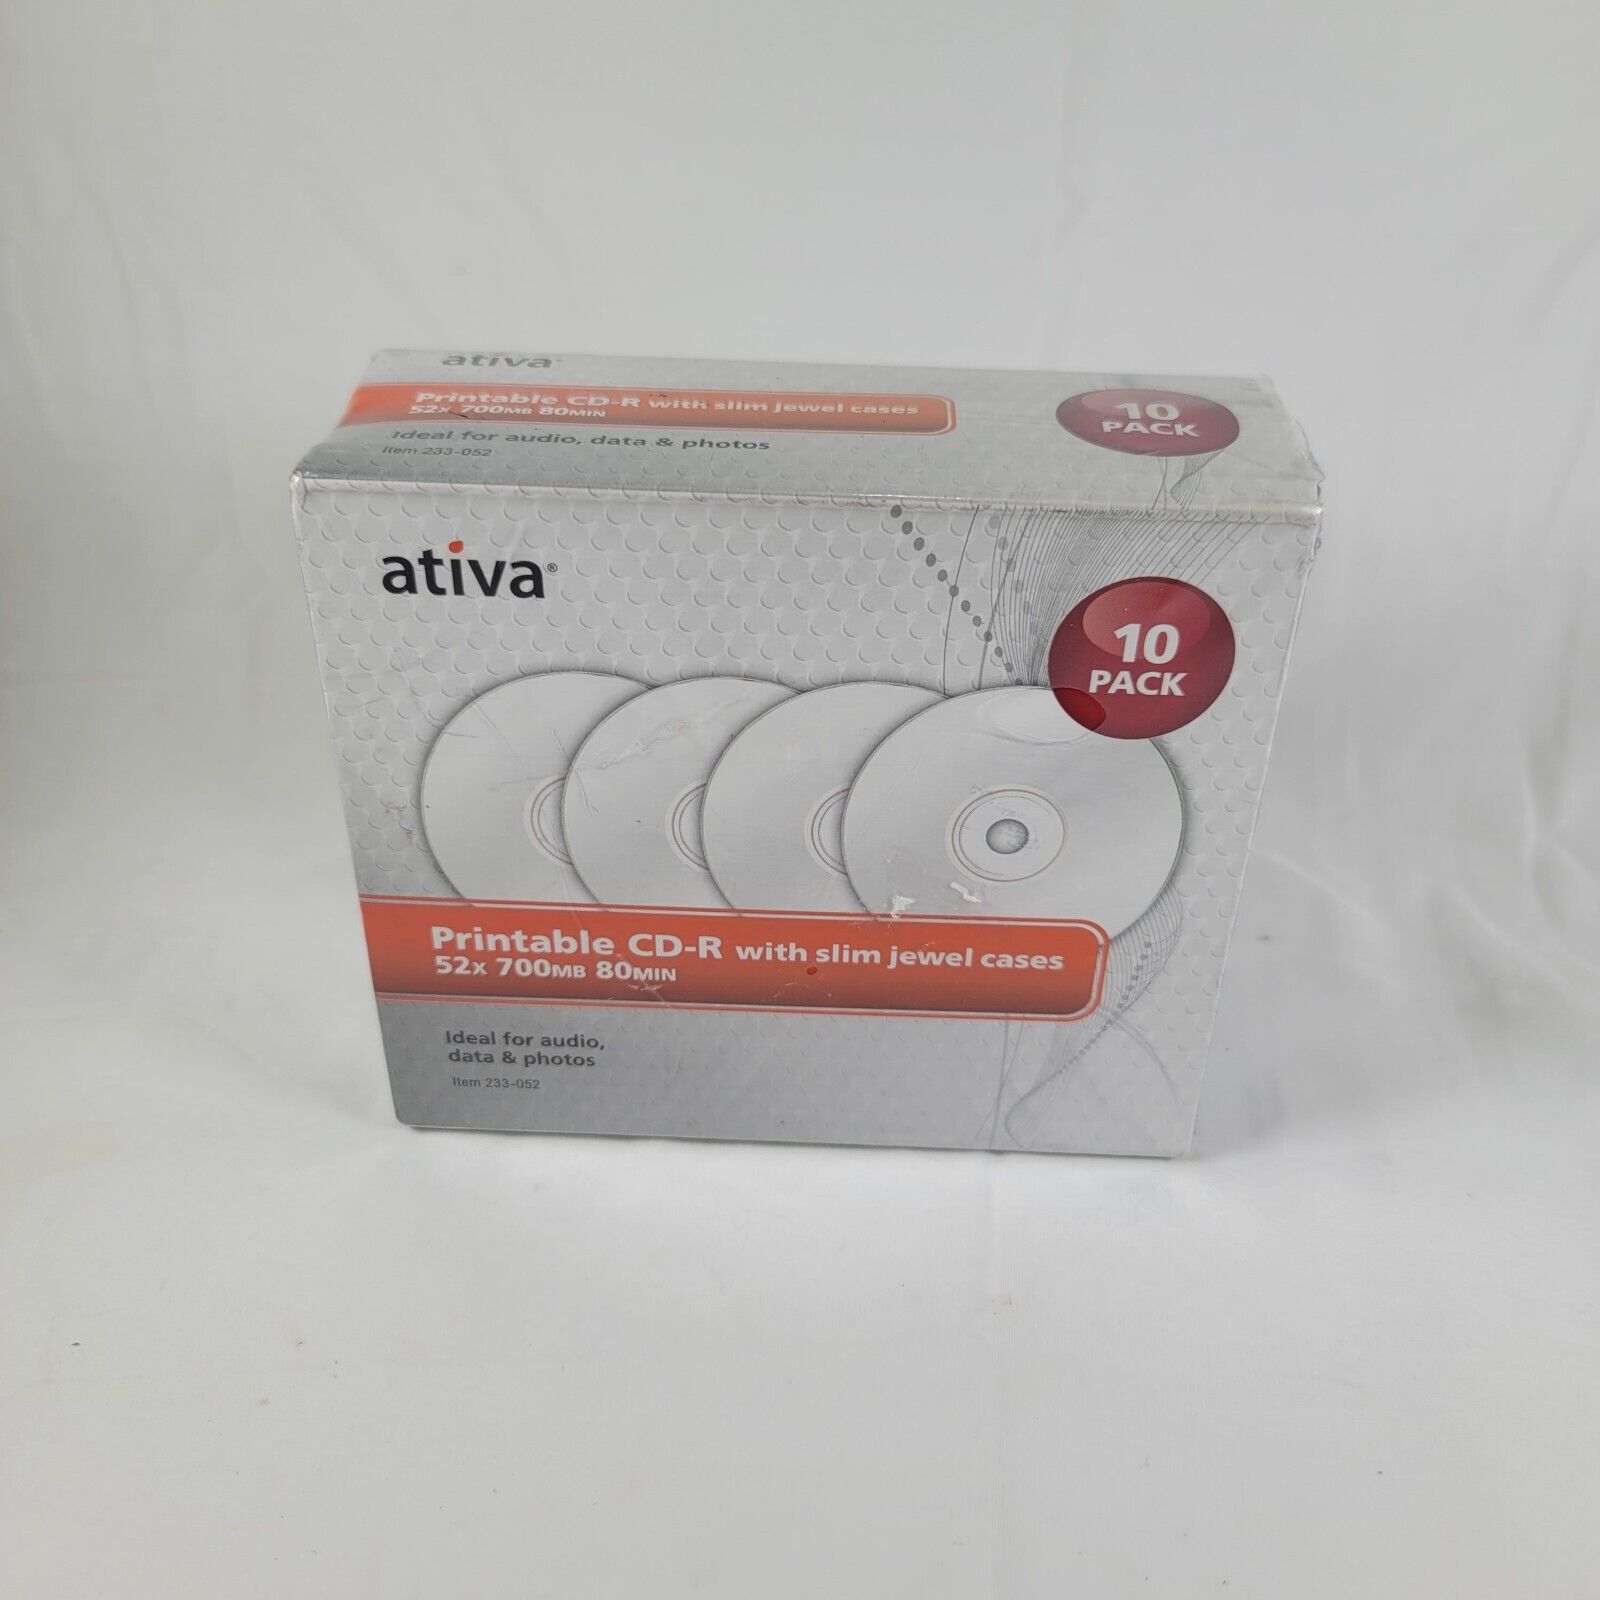 Ativa Printable CD-R With Slim Jewel Cases 52 X 700mb 80 Min 10 Pack -NEW SEALED